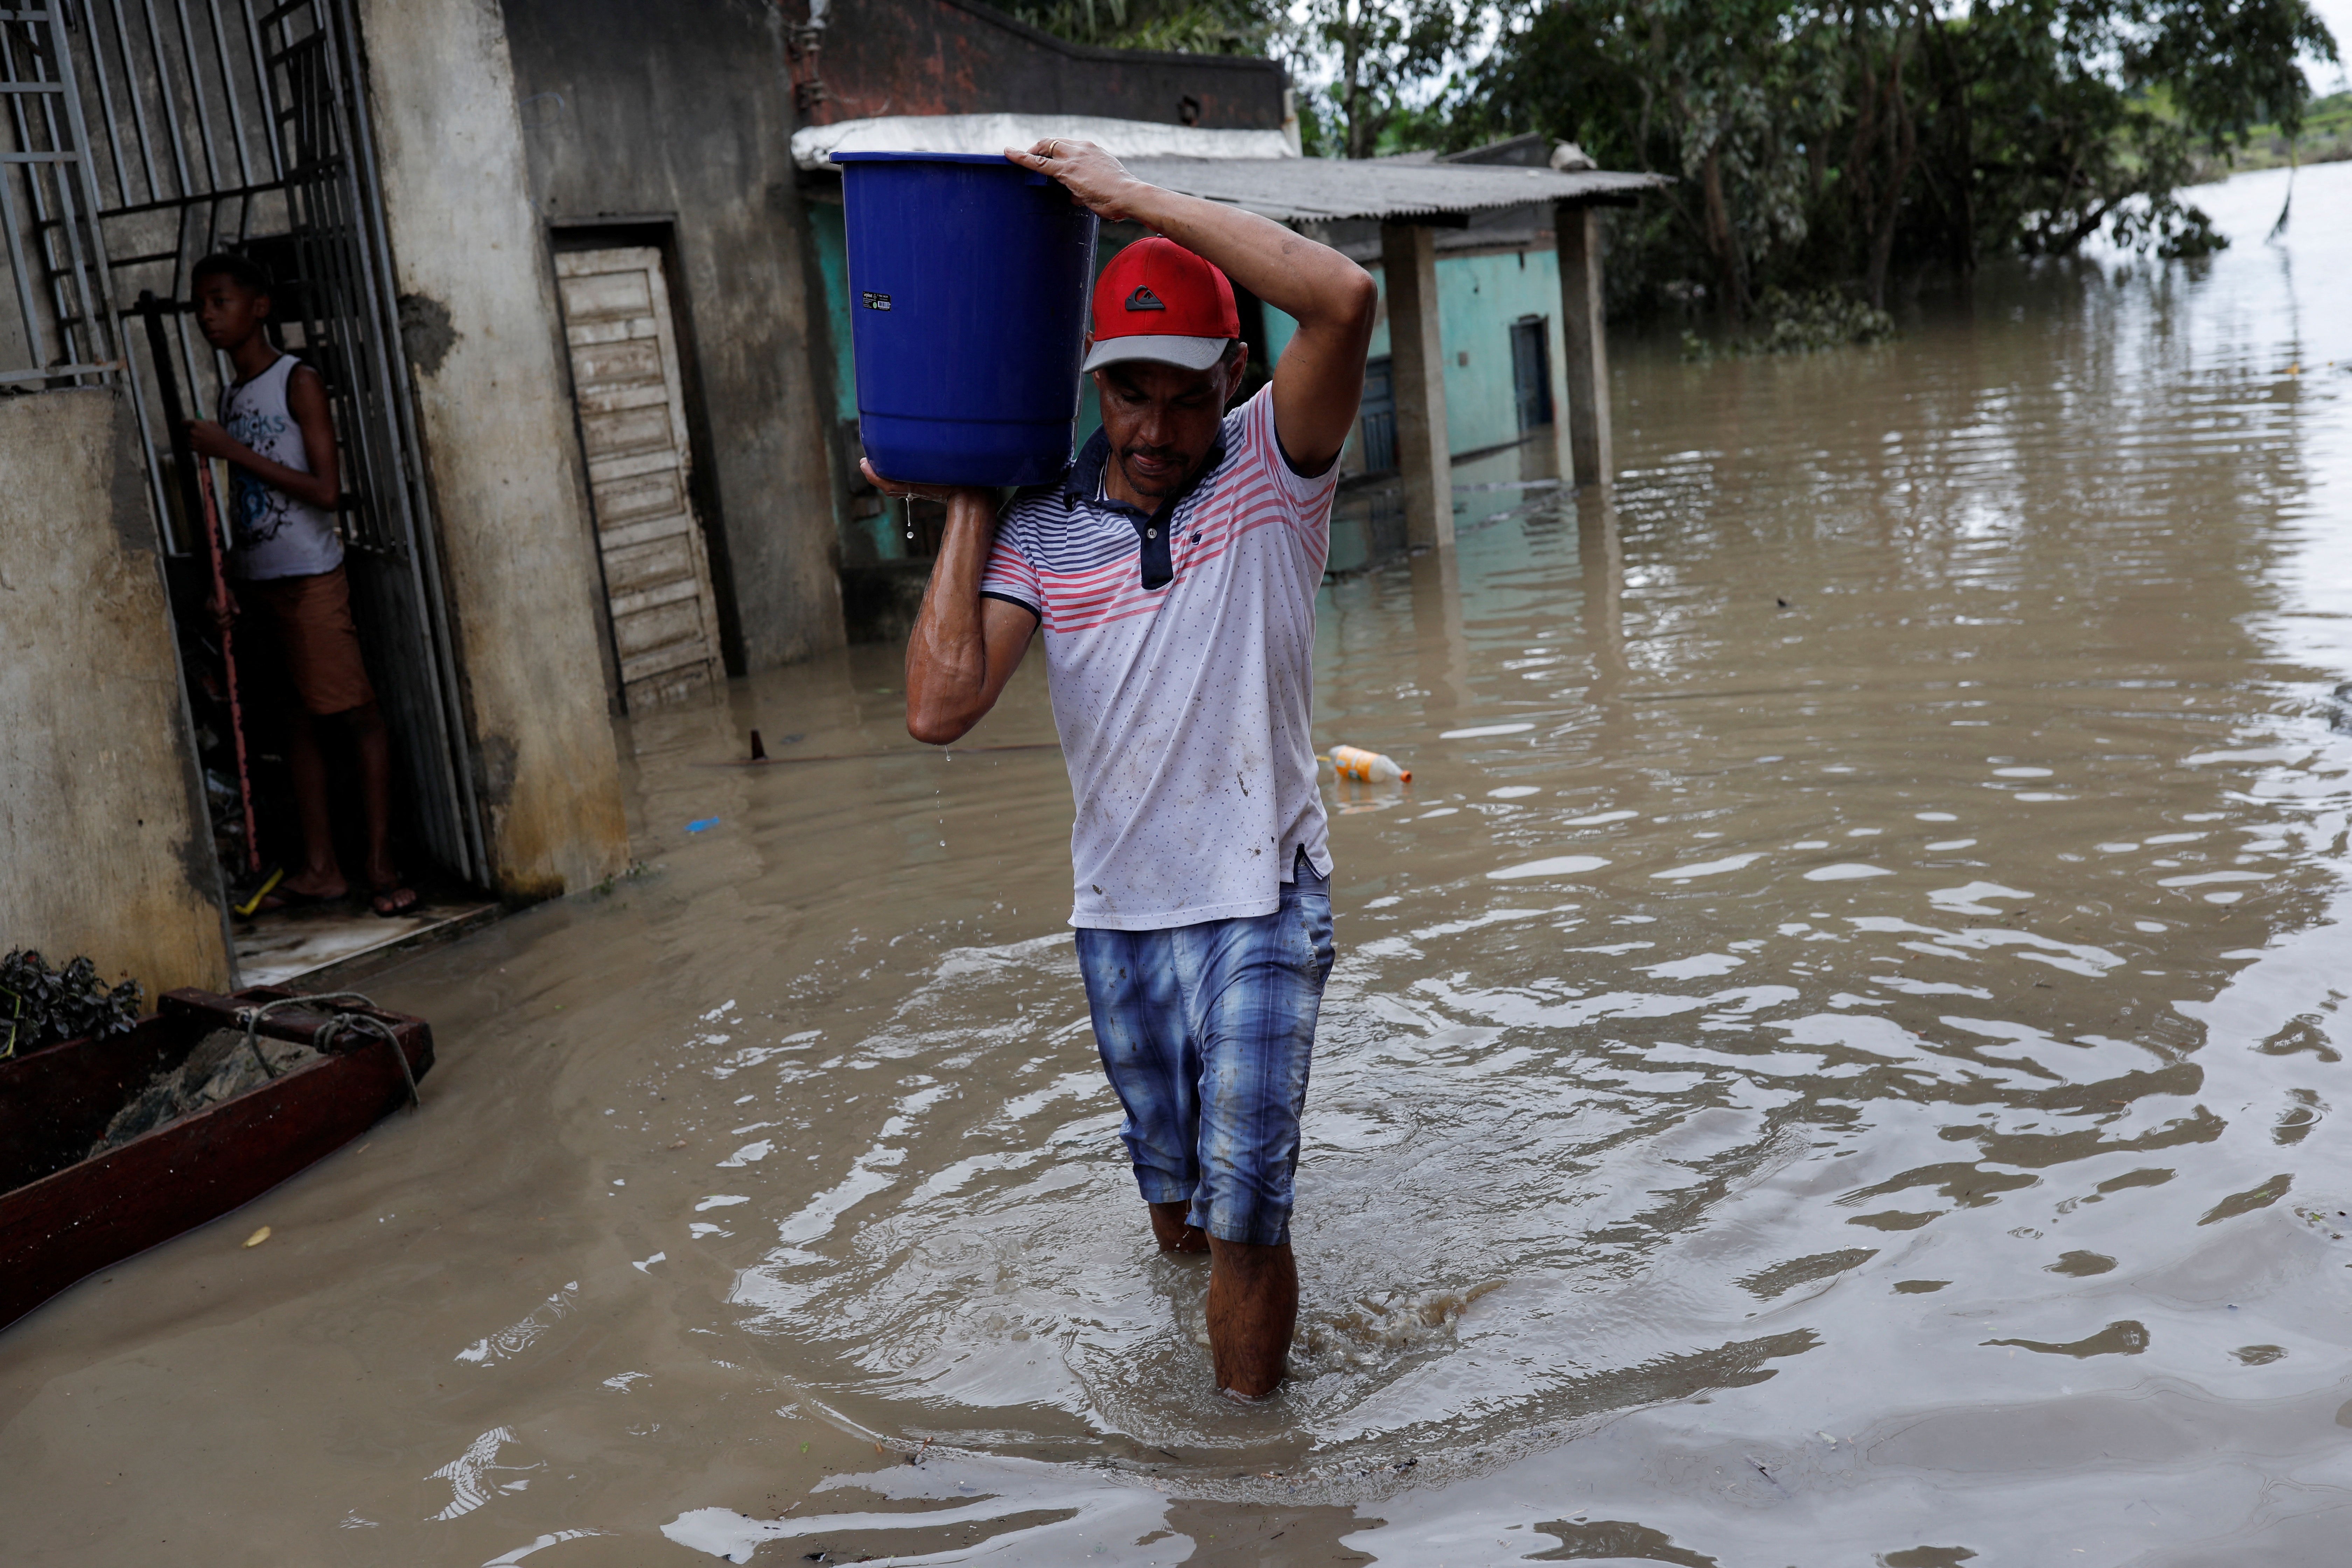 A man carries a bucket of water, during floods caused due to heavy rains, in Itabuna, Bahia state, Brazil December 27, 2021. REUTERS/Amanda Perobelli